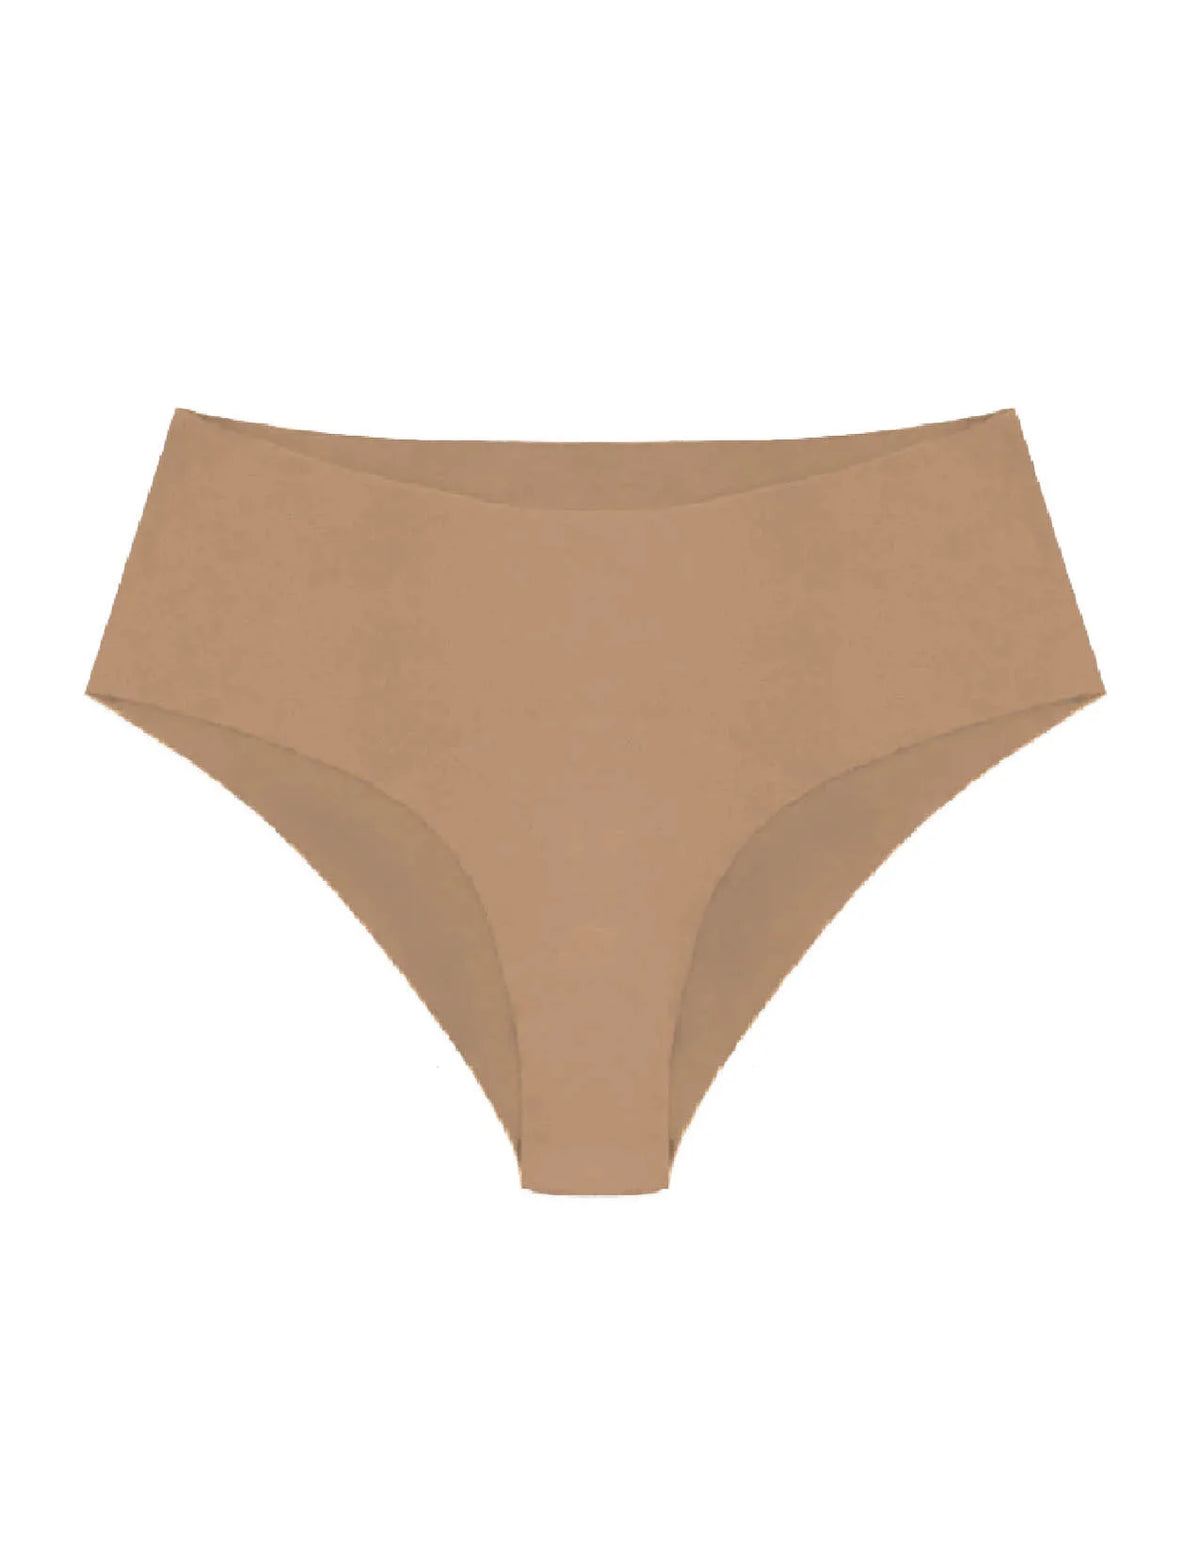 Seamless, Organic, Cotton Low-Rise Hipster at Belle Lacet Lingerie